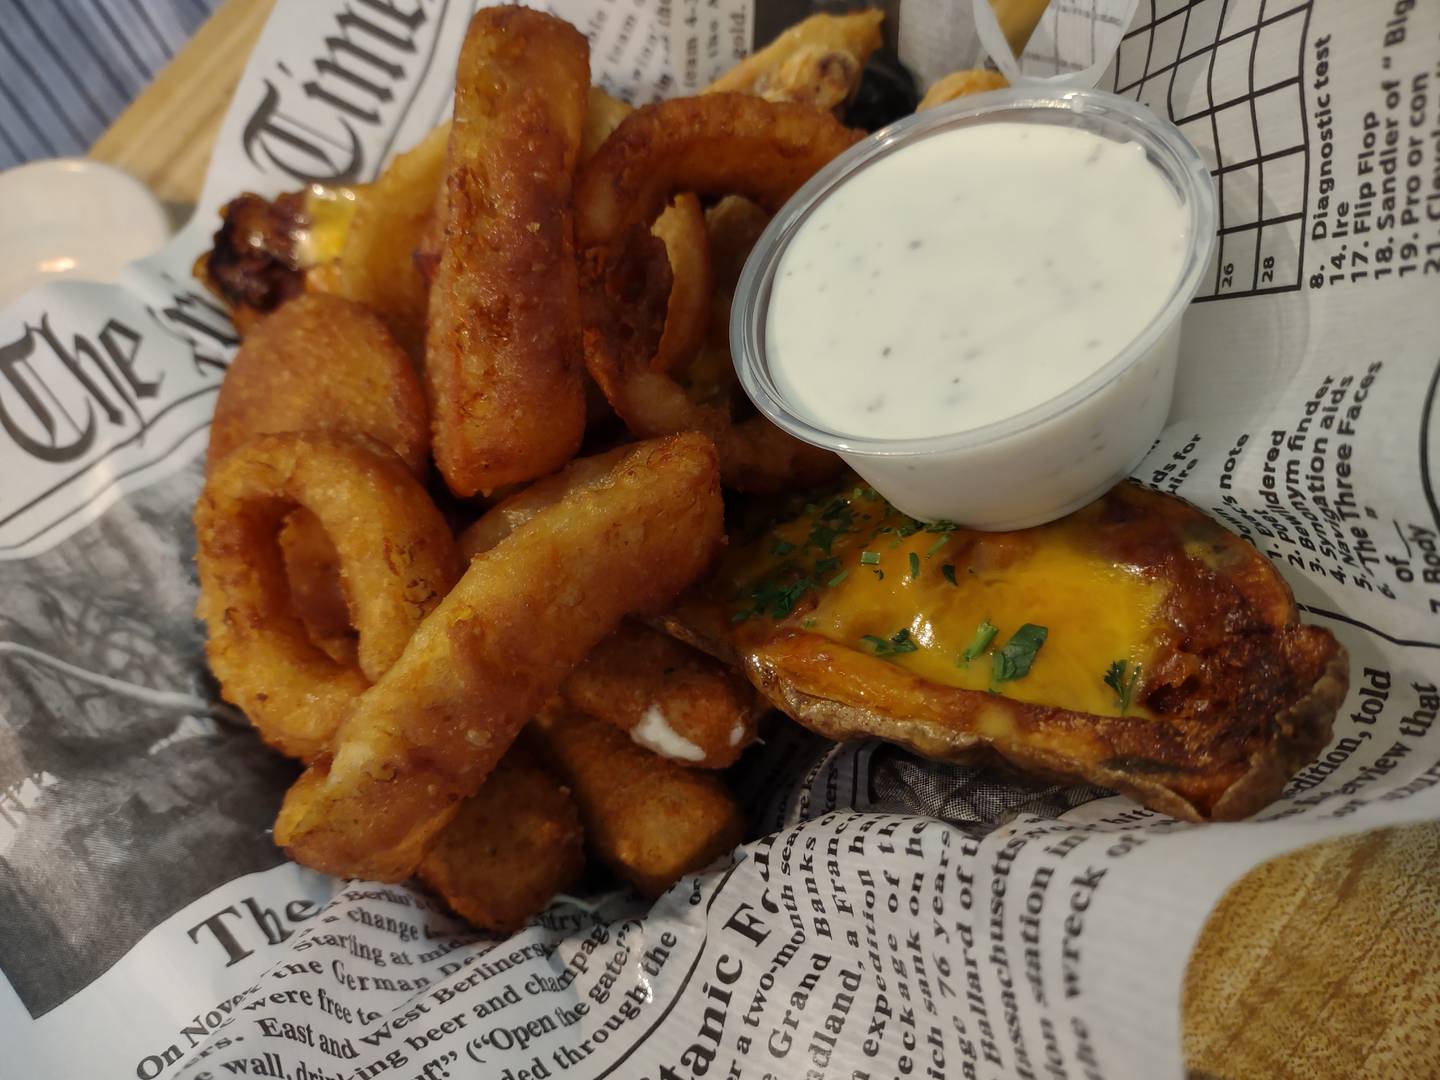 The Maria's basket appetizer includes two potato skins, four chicken wings, four mozzarella sticks and a handful of onion rings.